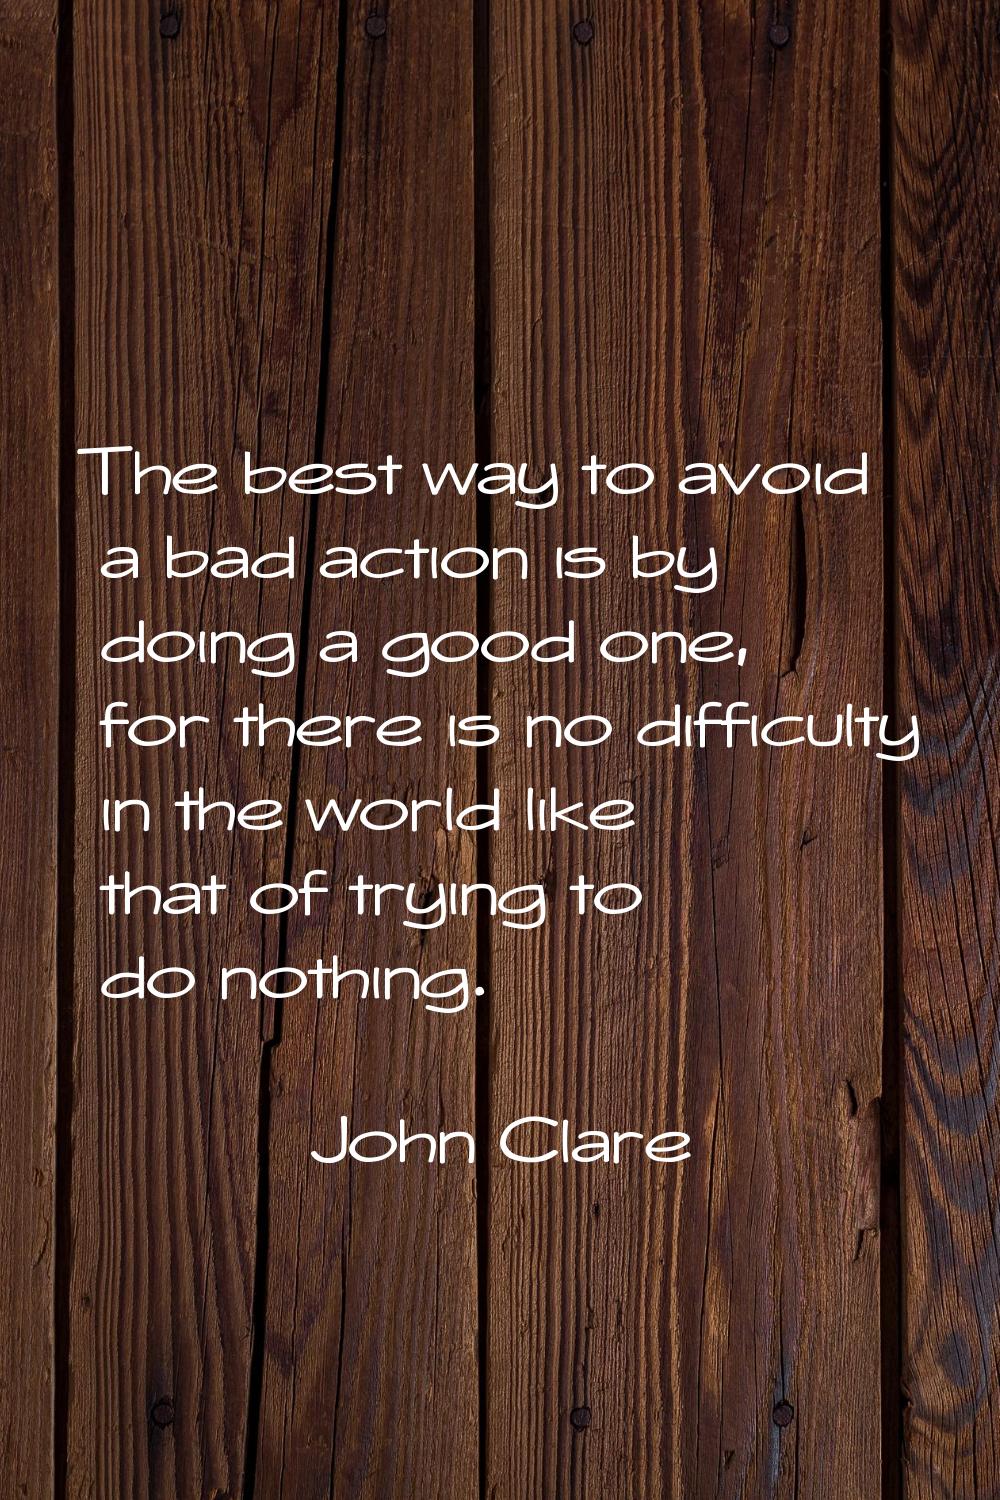 The best way to avoid a bad action is by doing a good one, for there is no difficulty in the world 